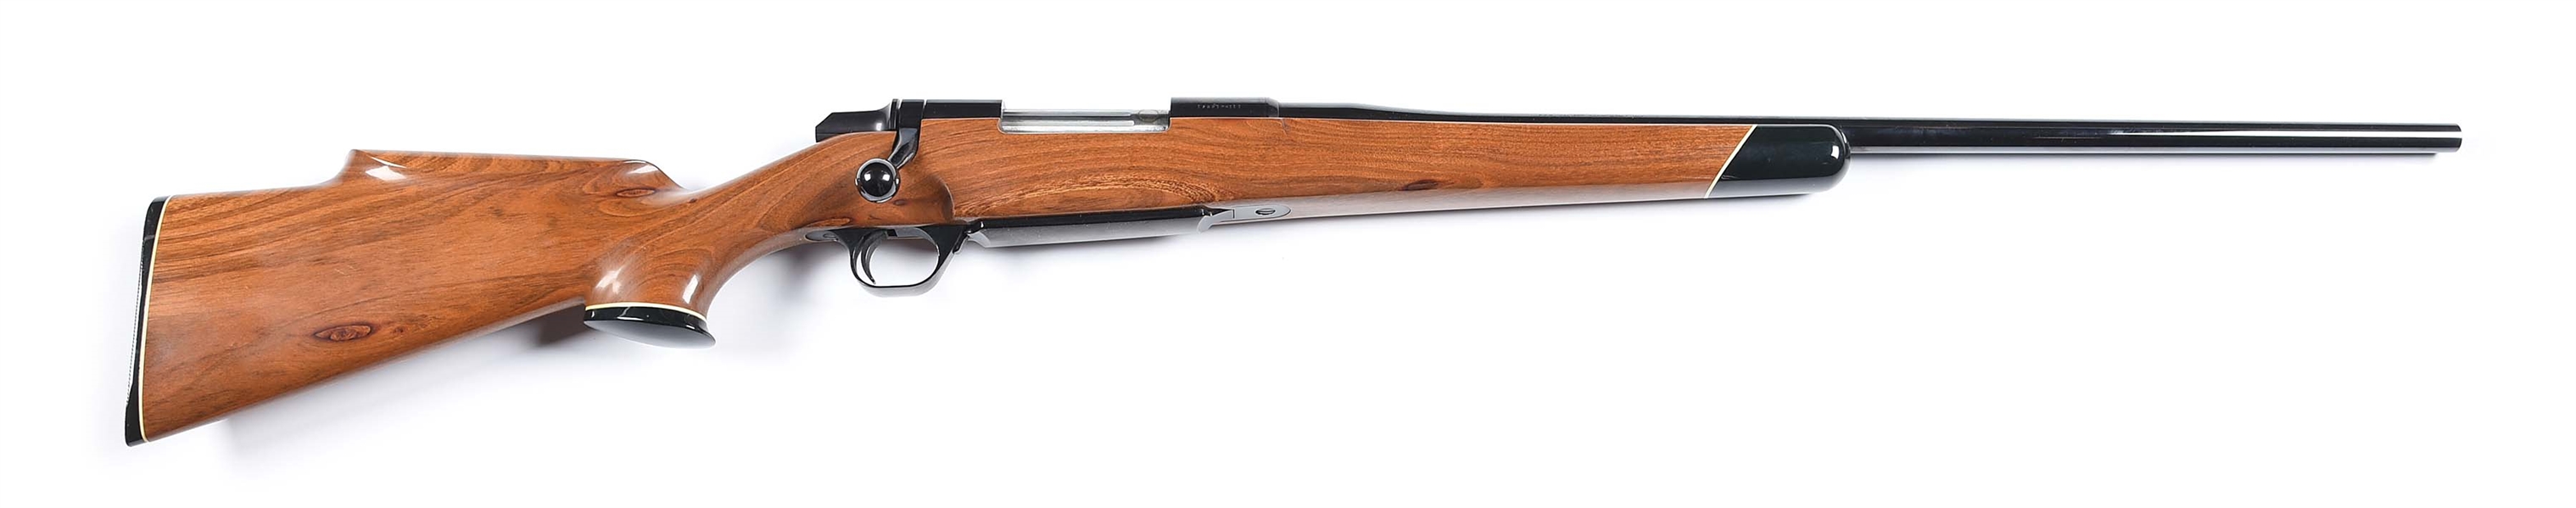 (M) BROWNING BBR BOLT ACTION RIFLE WITH MESQUITE (SCREWBEAN) STOCK.